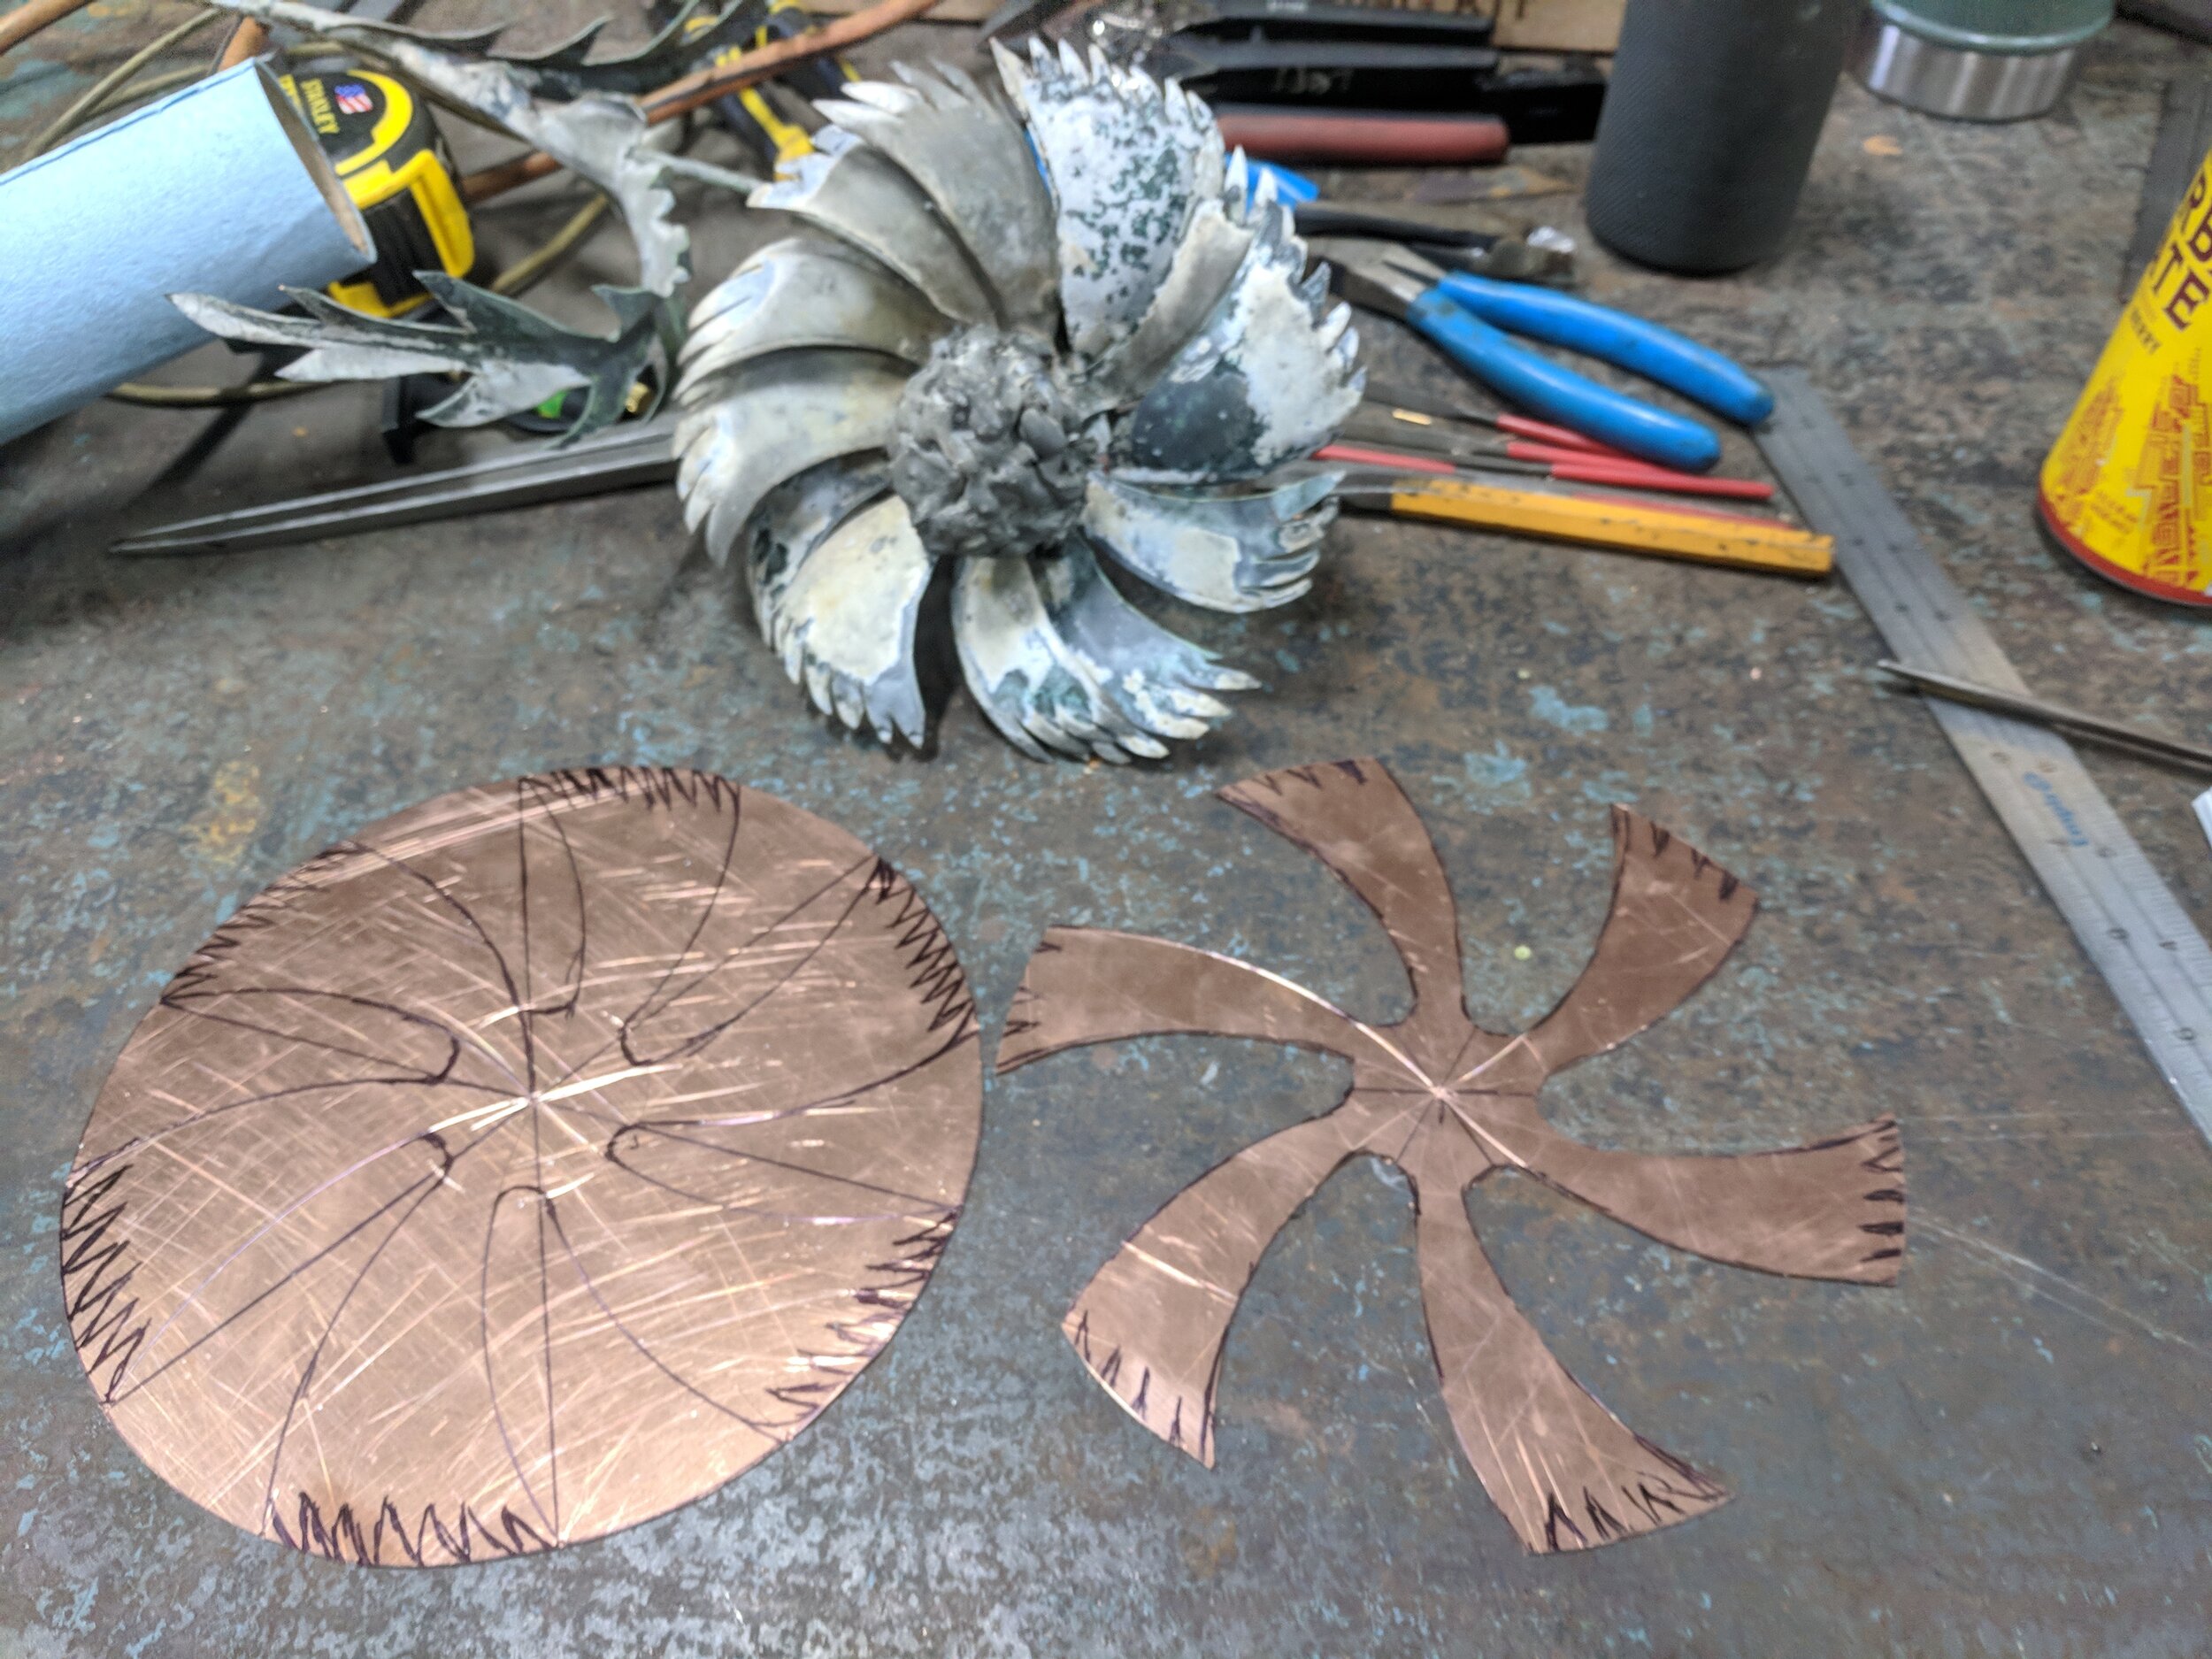  A layout process for creating the replica. Drew Reynolds wrote, “For each piece I had to translate the each part from the three dimensional form back to flat copper. It requires a lot of measuring and a near equal amount of estimation and sketching.